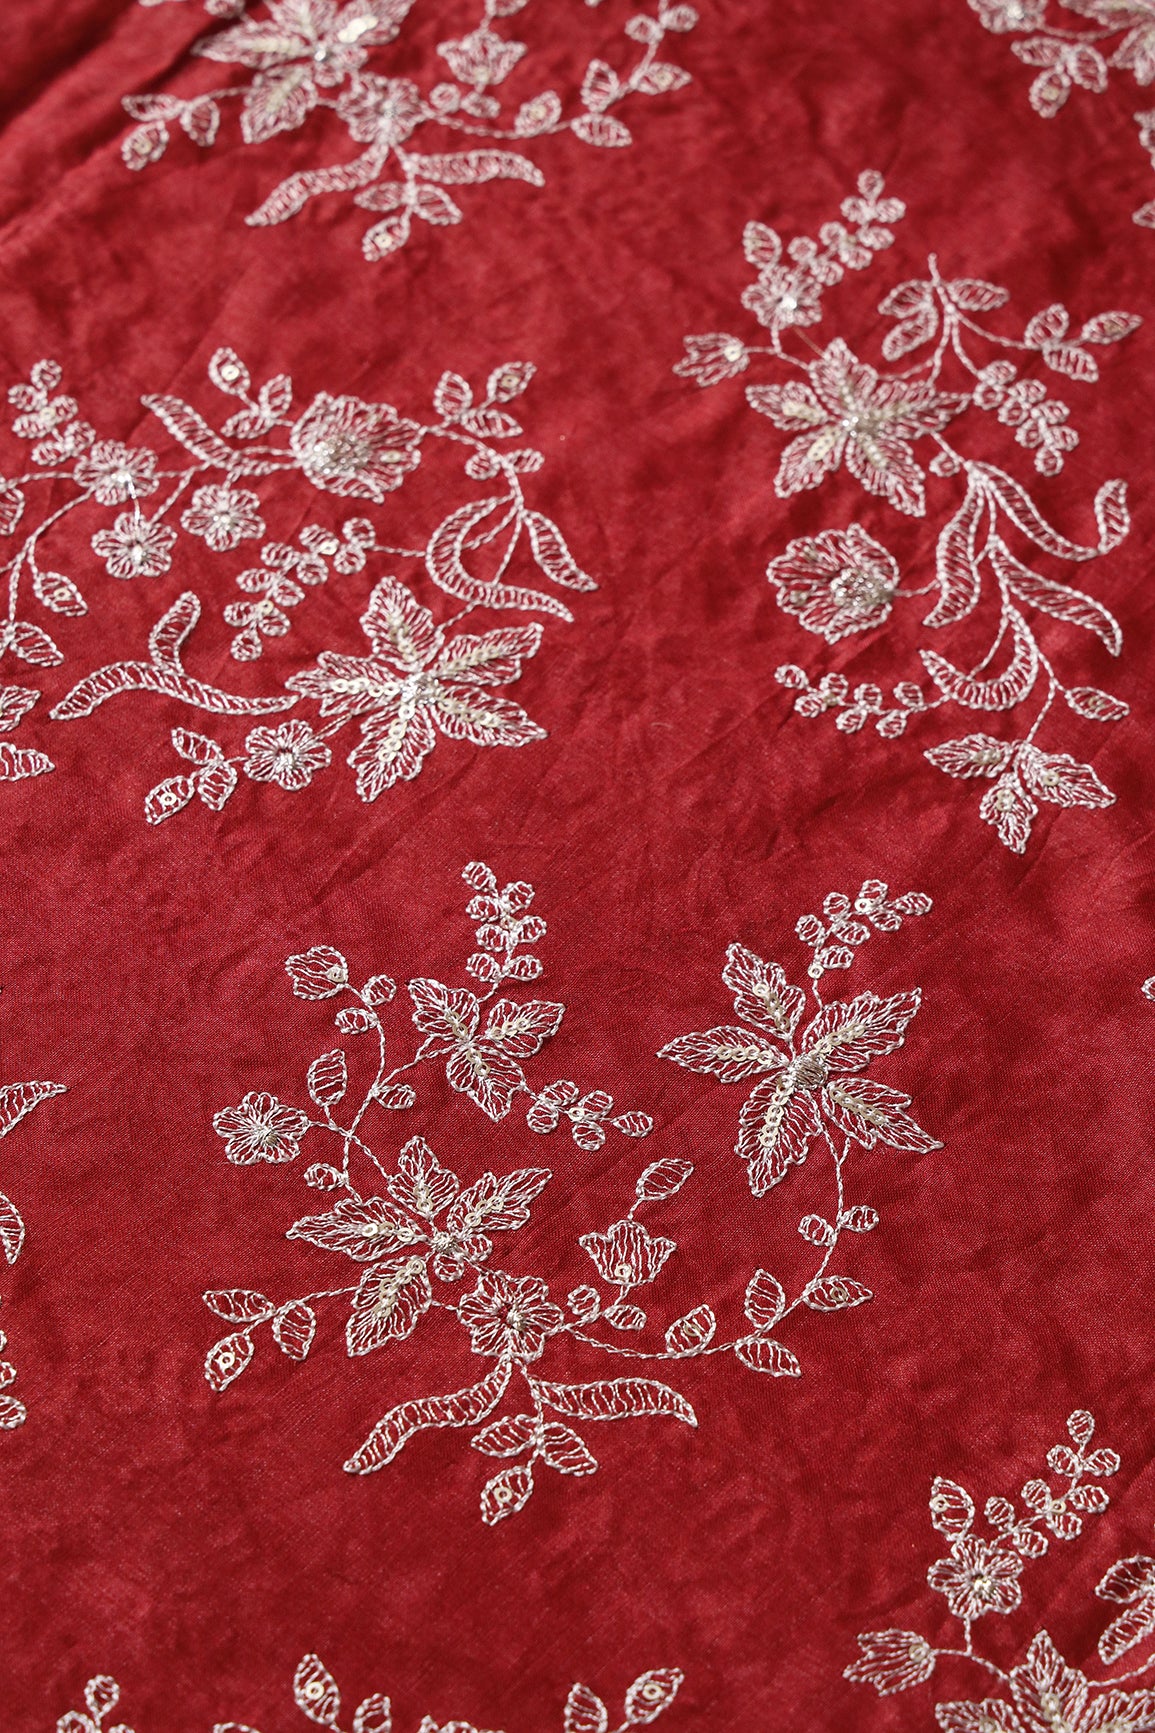 White Thread With Gold Sequins Floral Embroidery On Fire Brick Red Pure Bamboo Silk Fabric